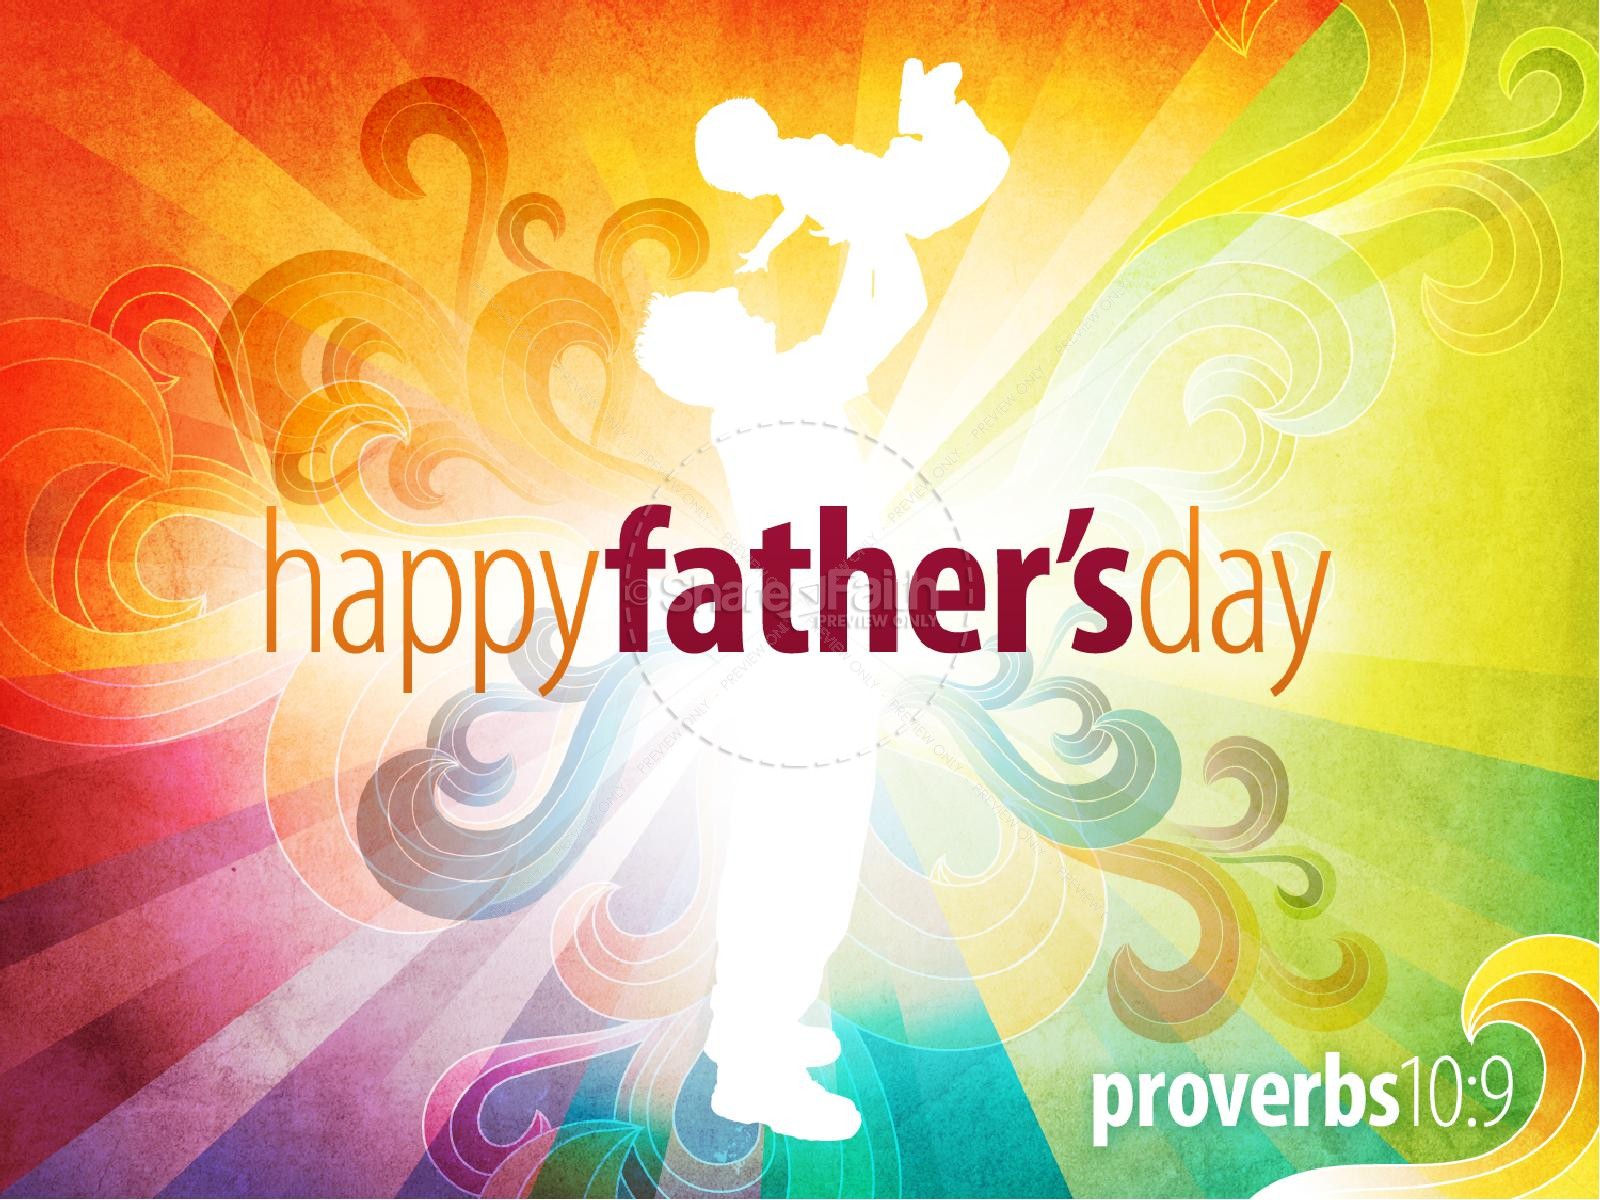 Happy Fathers Day Sermon PowerPoint | slide 1